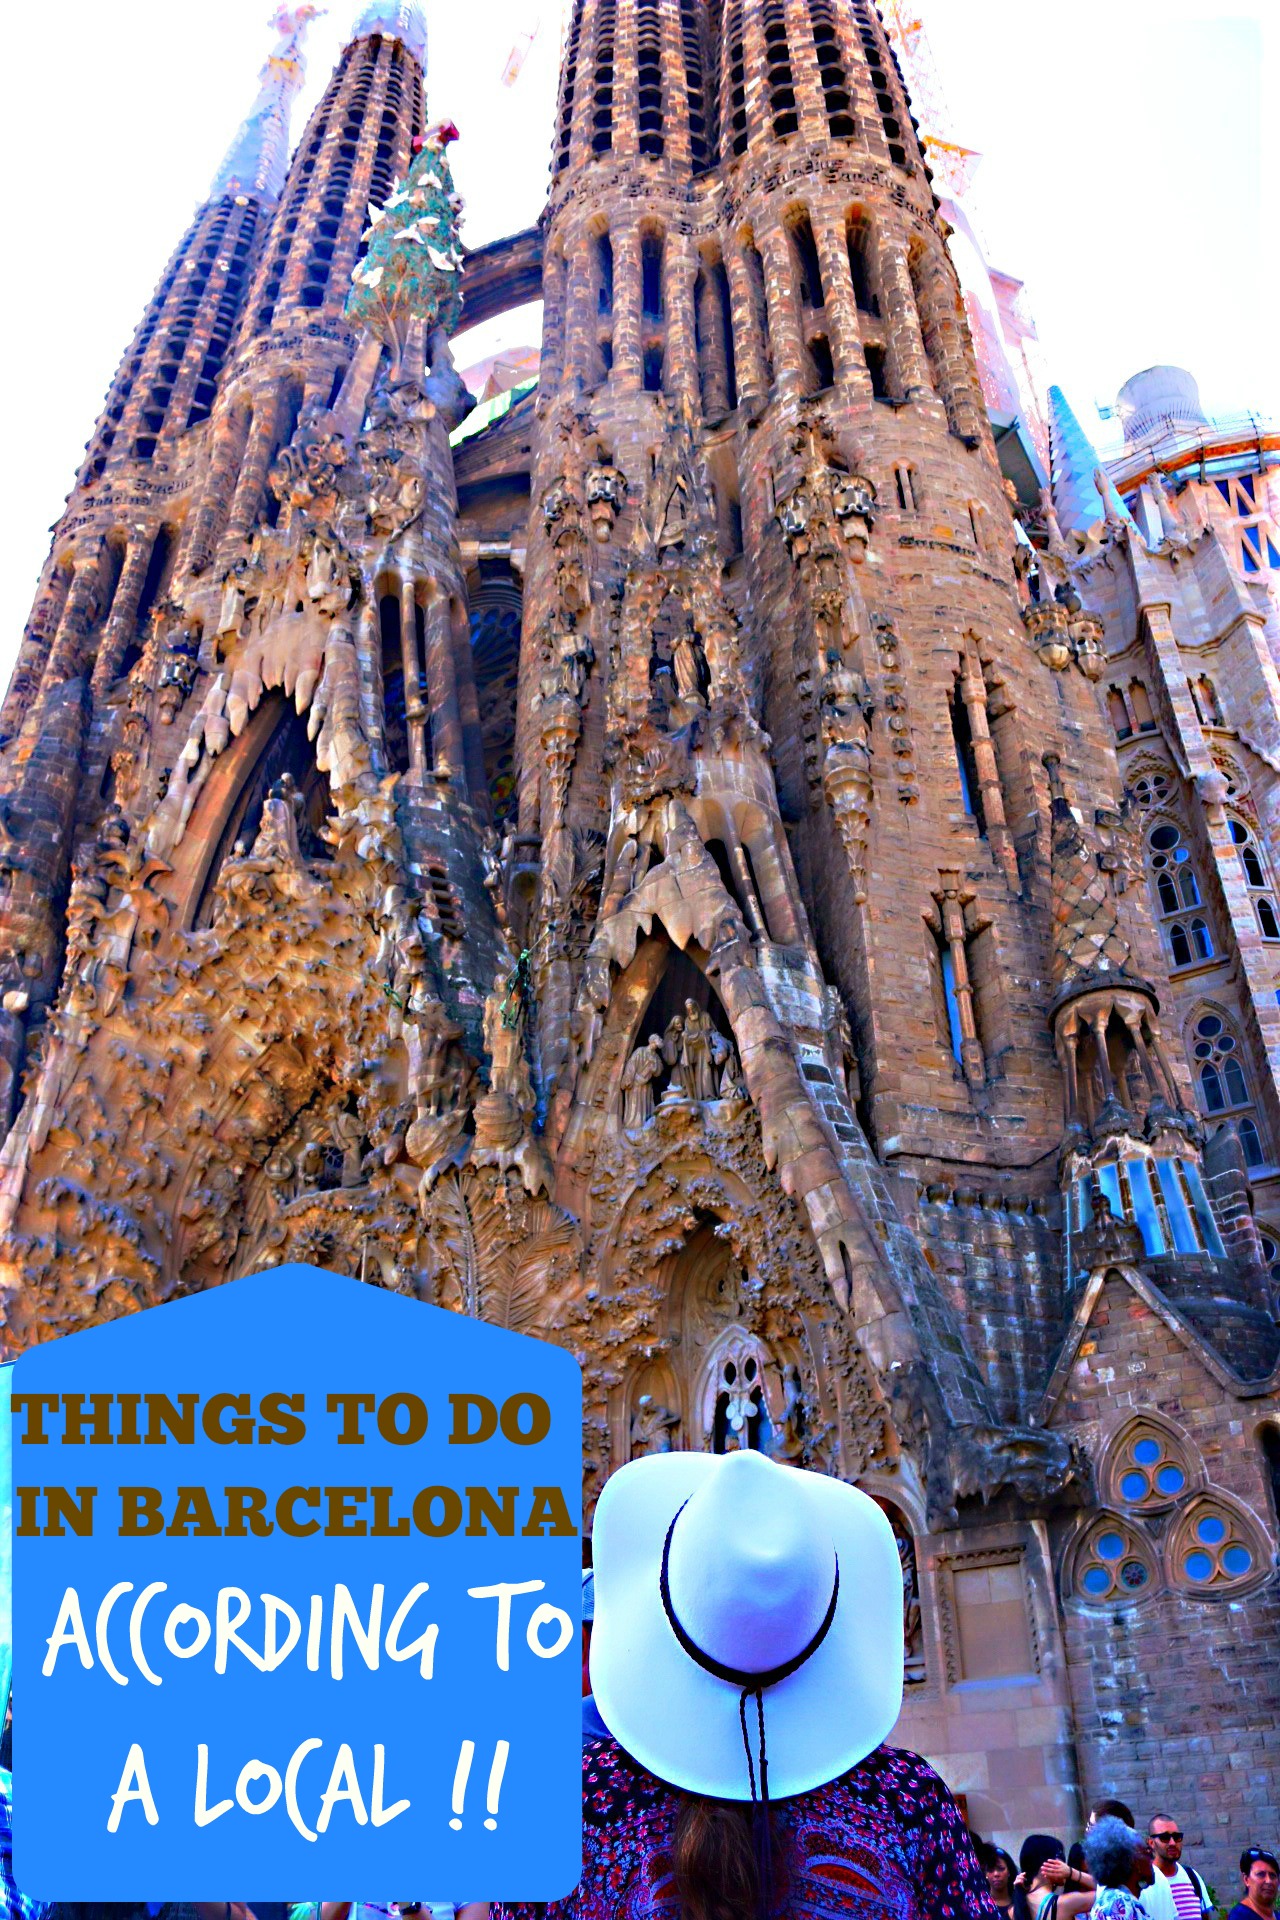 Top 5 Things To Do In Barcelona According To A Local